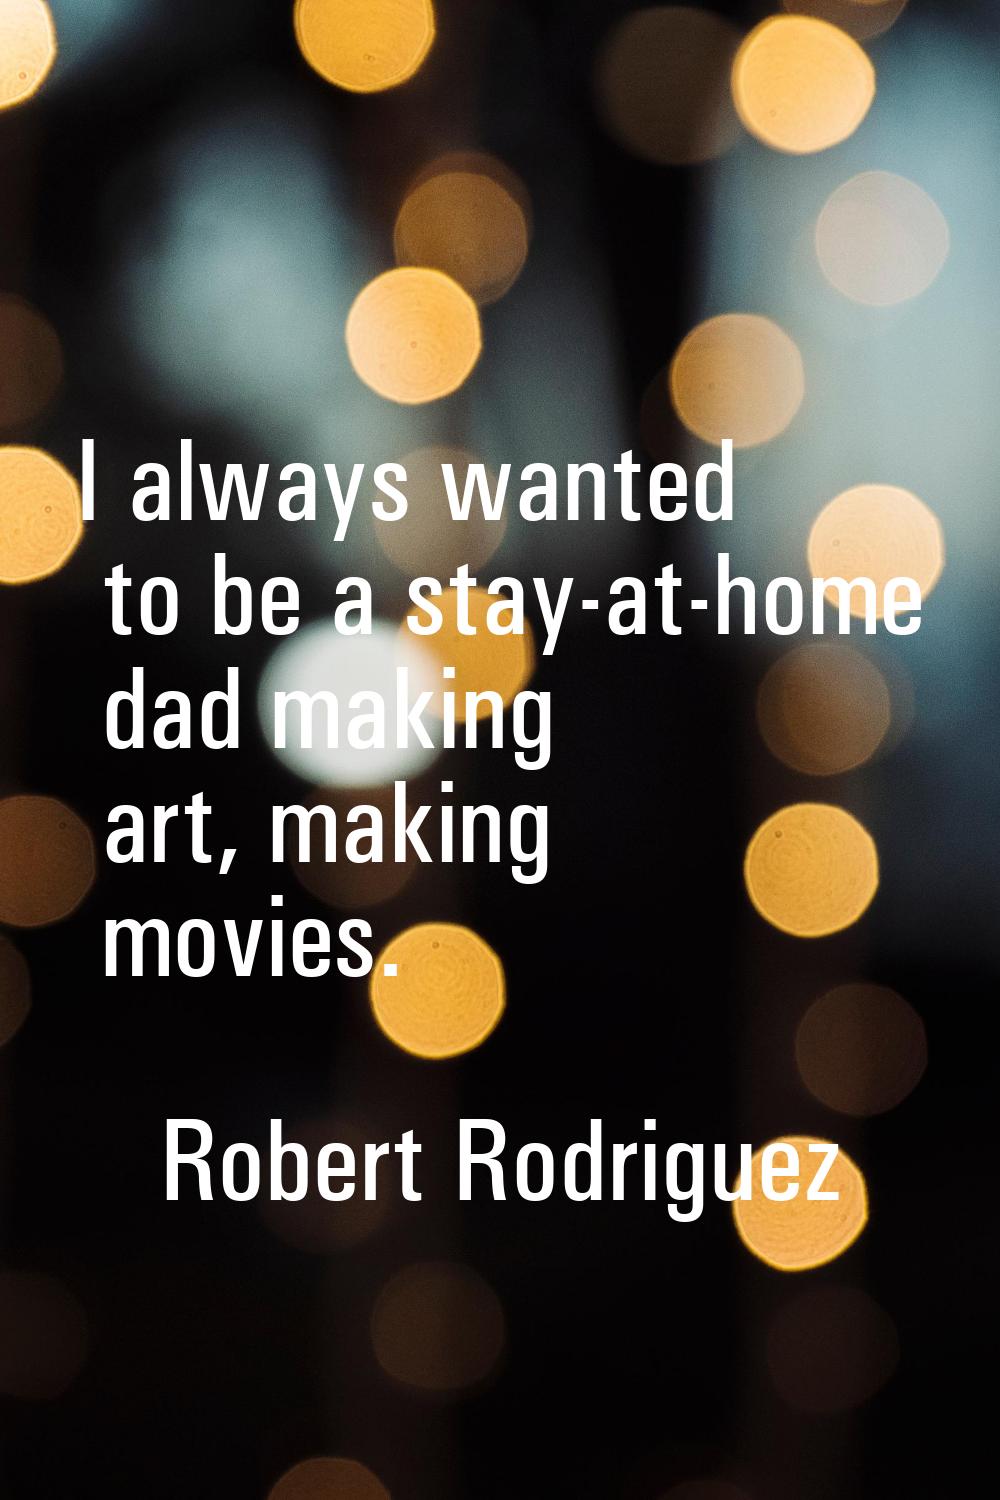 I always wanted to be a stay-at-home dad making art, making movies.